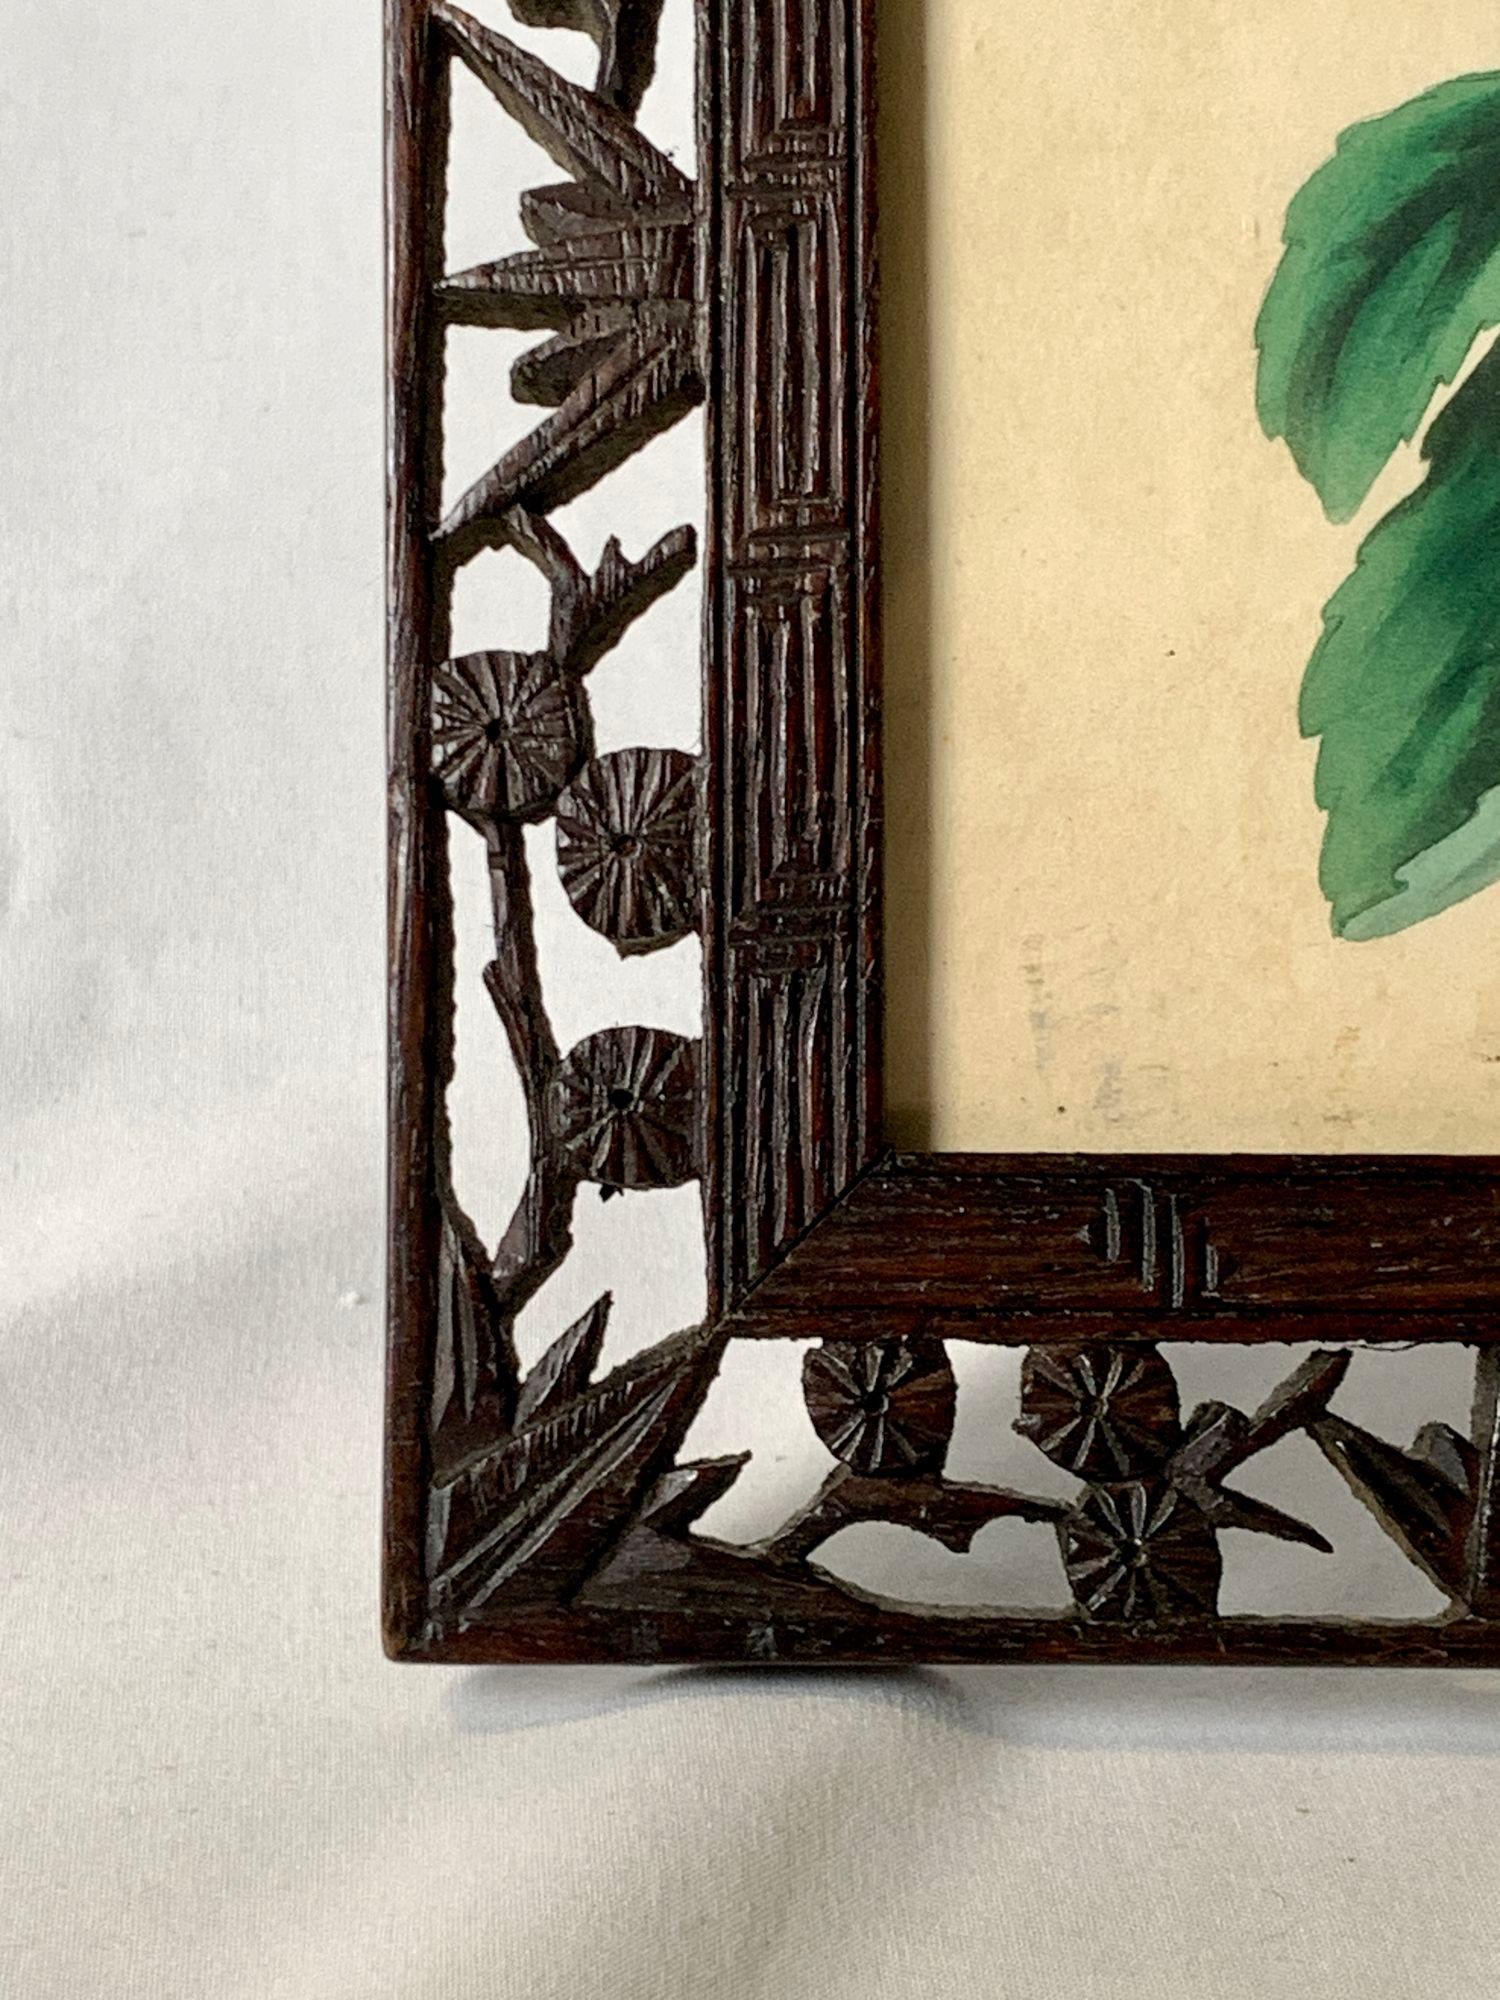 Paper Botanical Print of Dahlia Original Victorian Chinoiserie Lacquered Wood Frame For Sale